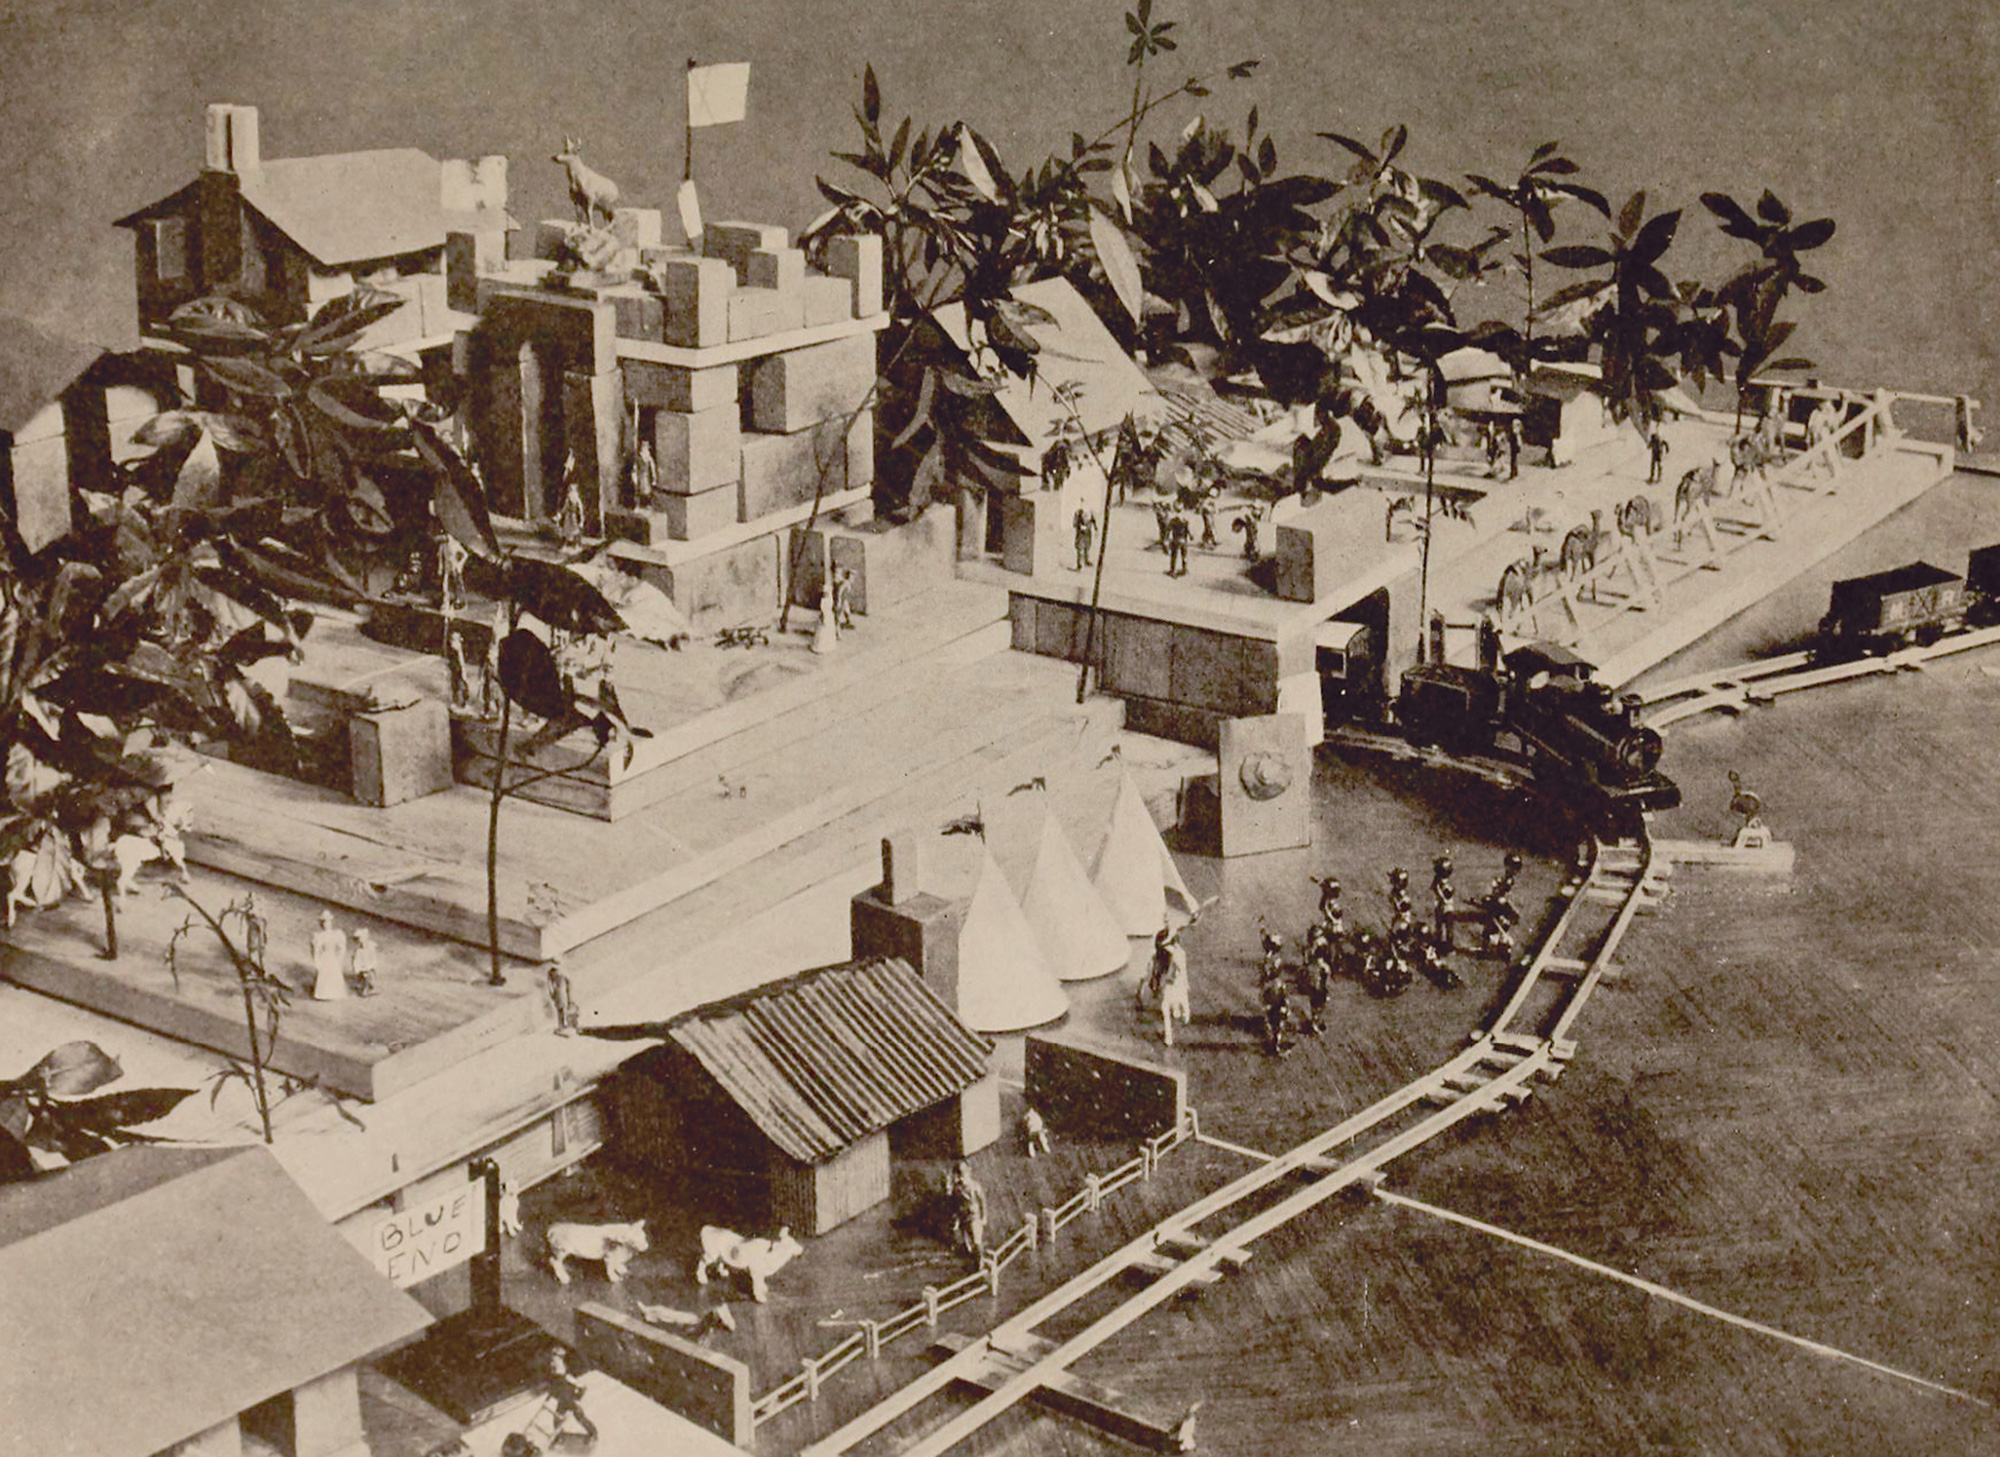 A photograph taken by H. G. Wells from the nineteen twelve edition of his “Floor Games.” It depicts a “terraced hill on which stands the Town Hall. Behind can be seen the Zoölogical Gardens.”